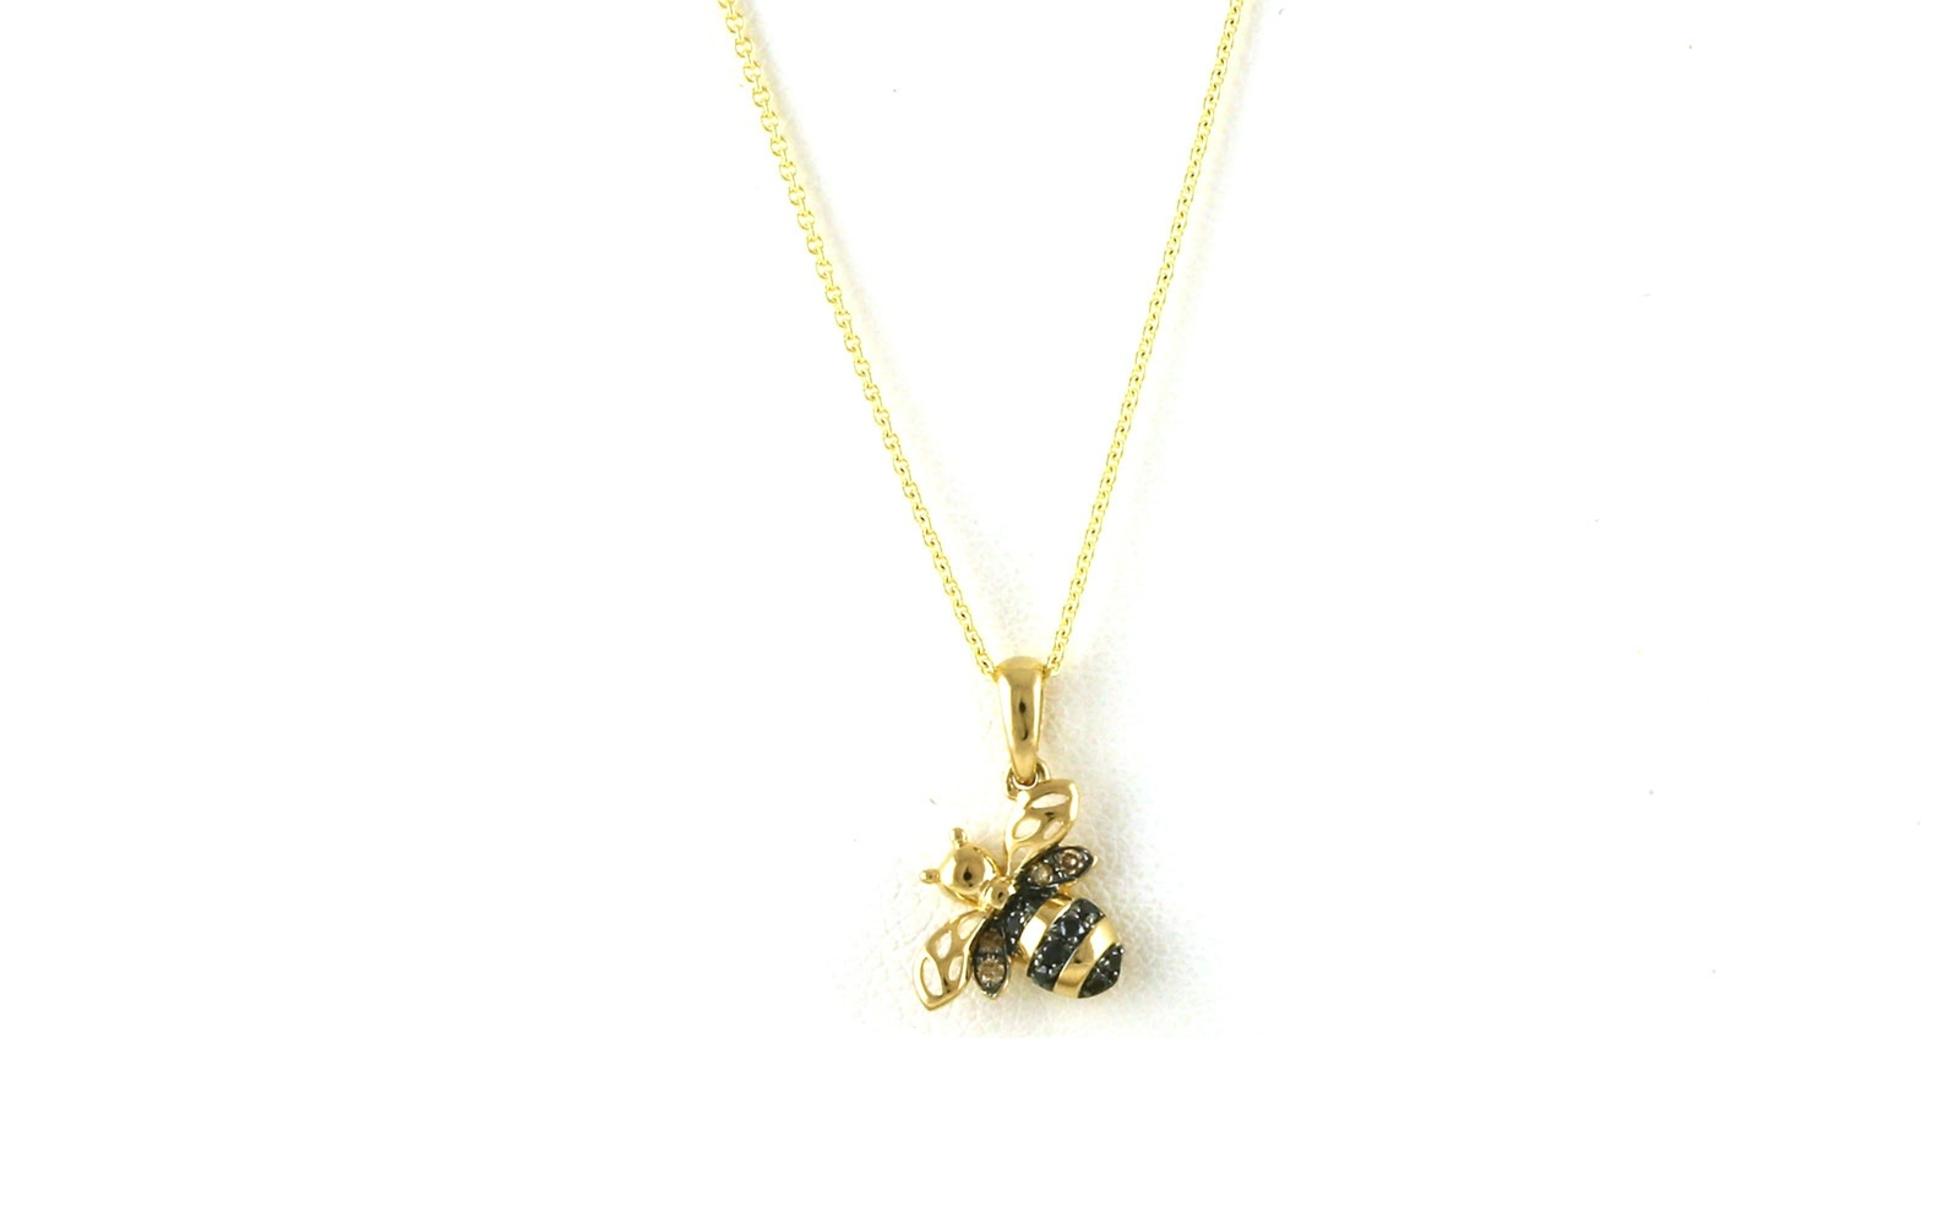 Bumblebee Black Diamond Necklace in Yellow Gold (0.07cts TWT)